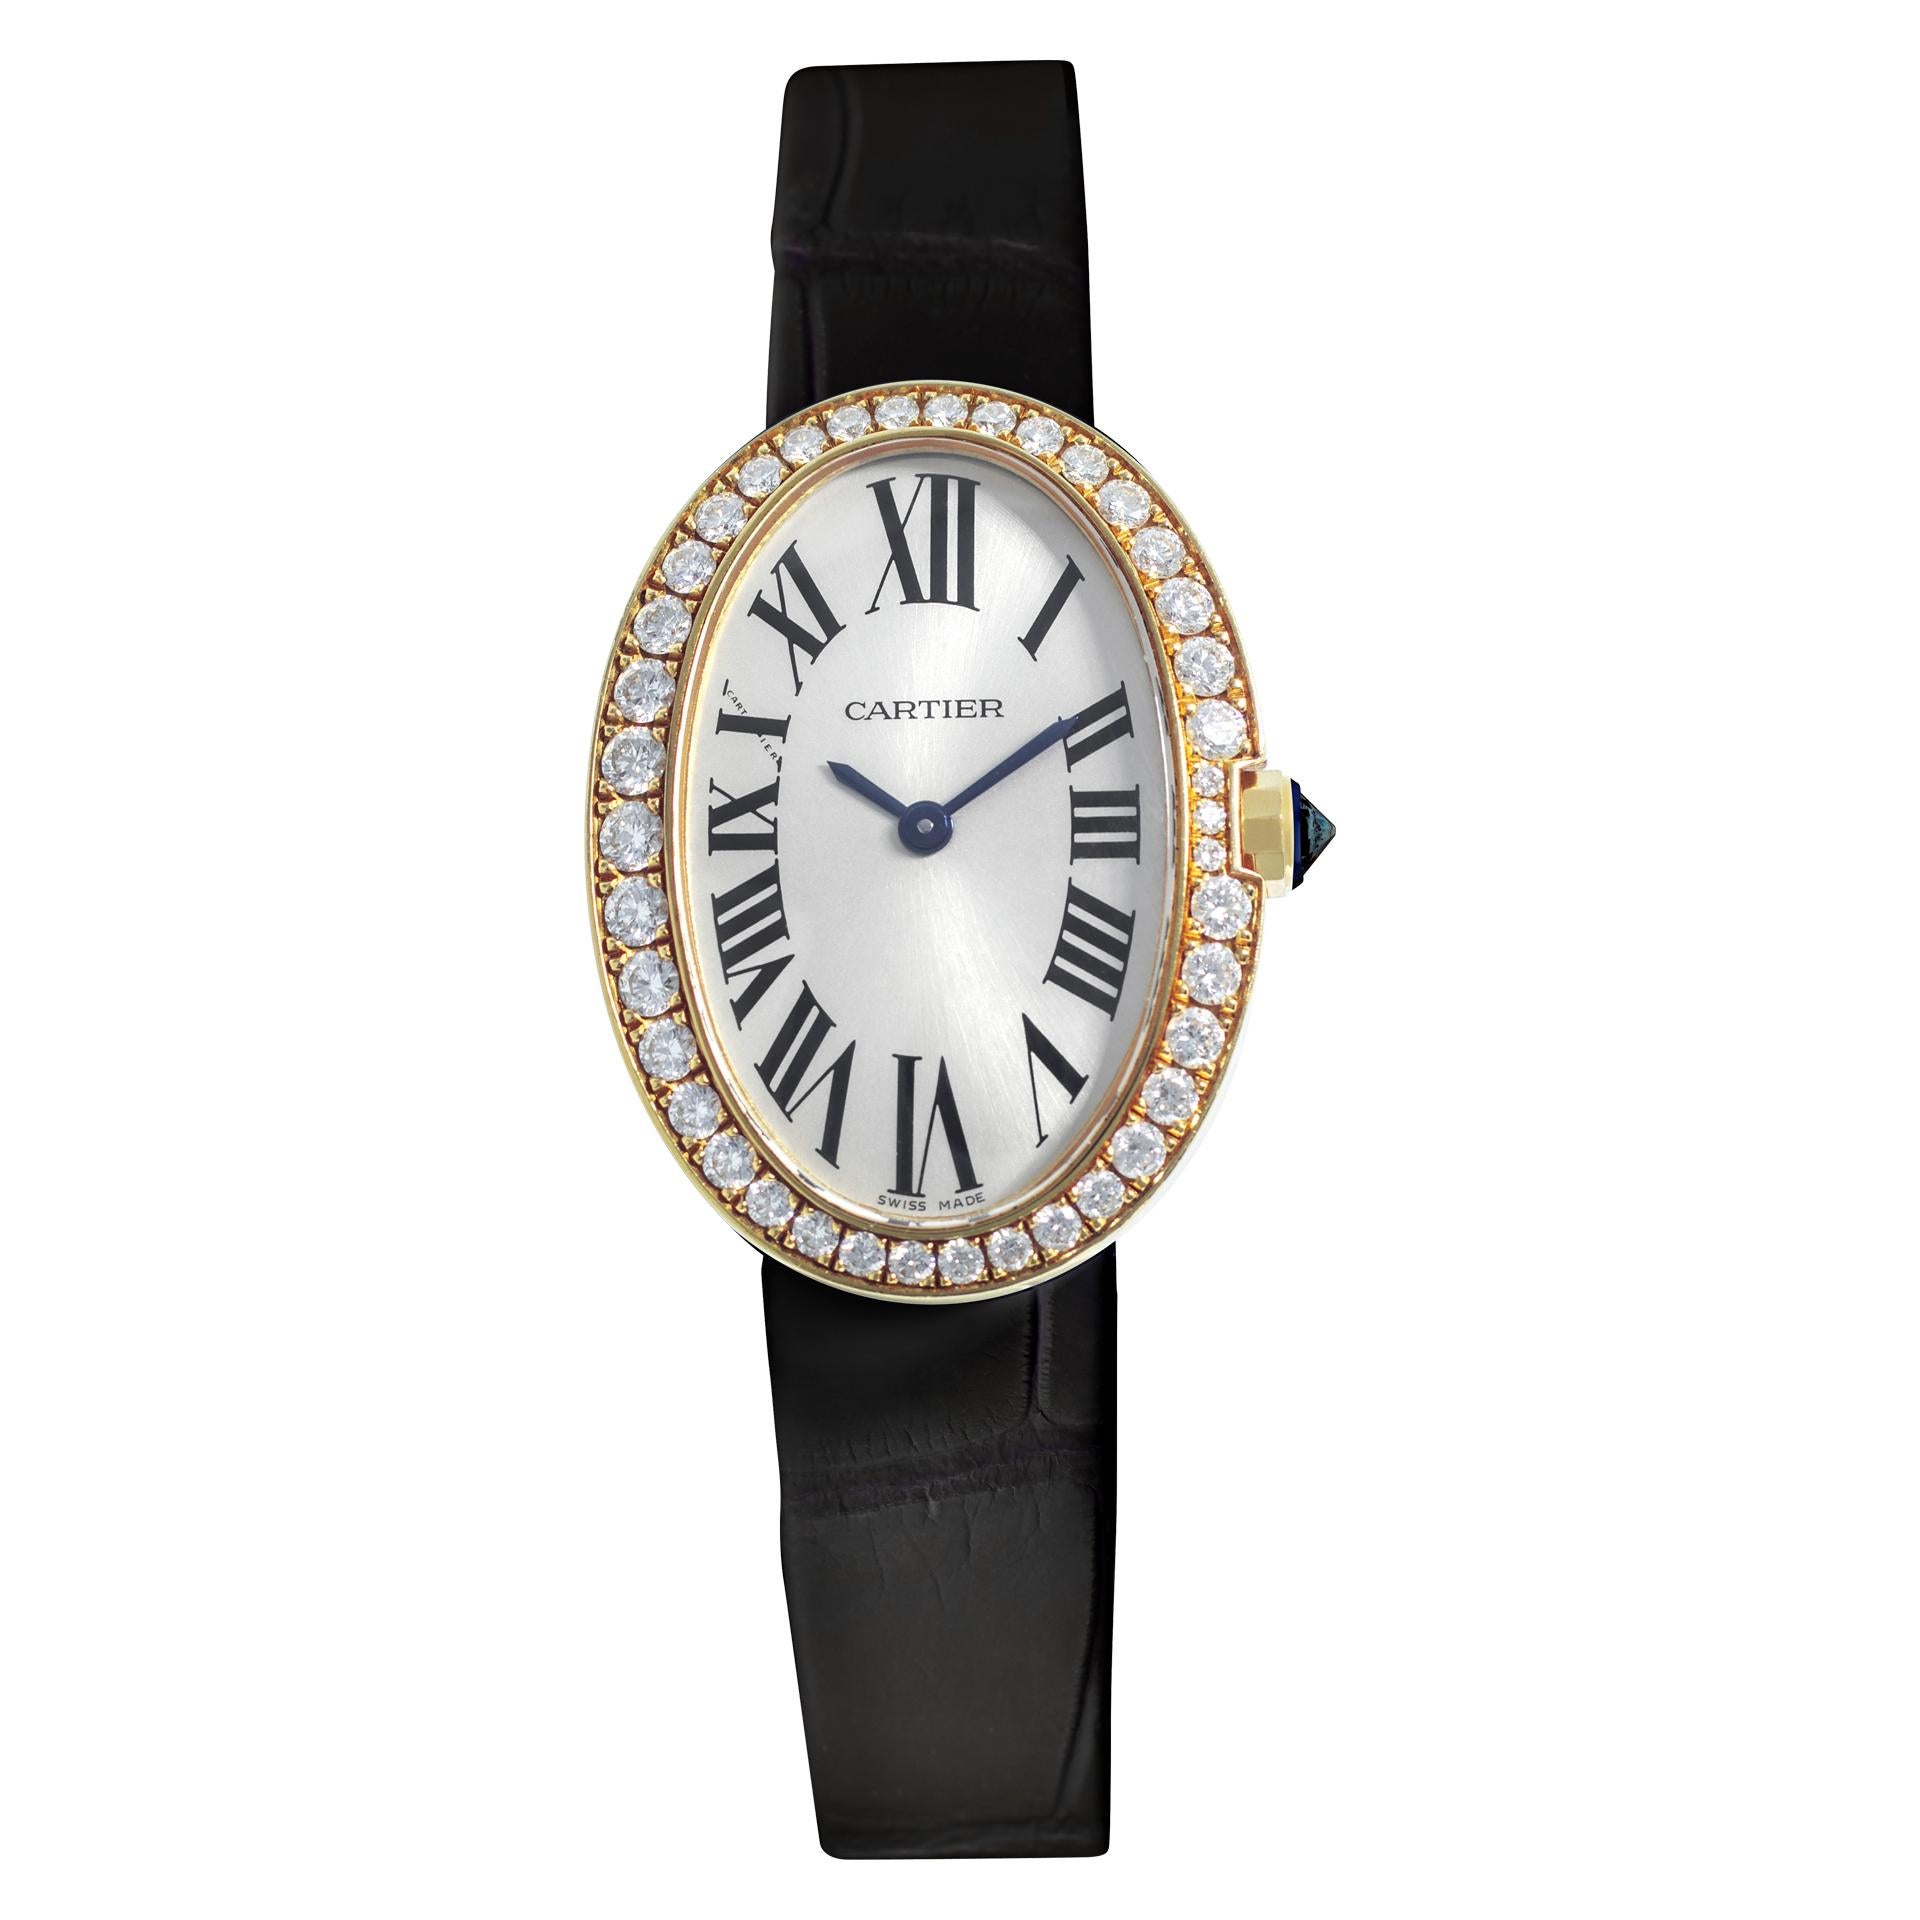 Cartier Baignoire wb520004  in yellow gold with a Silver dial 23mm Quartz watch